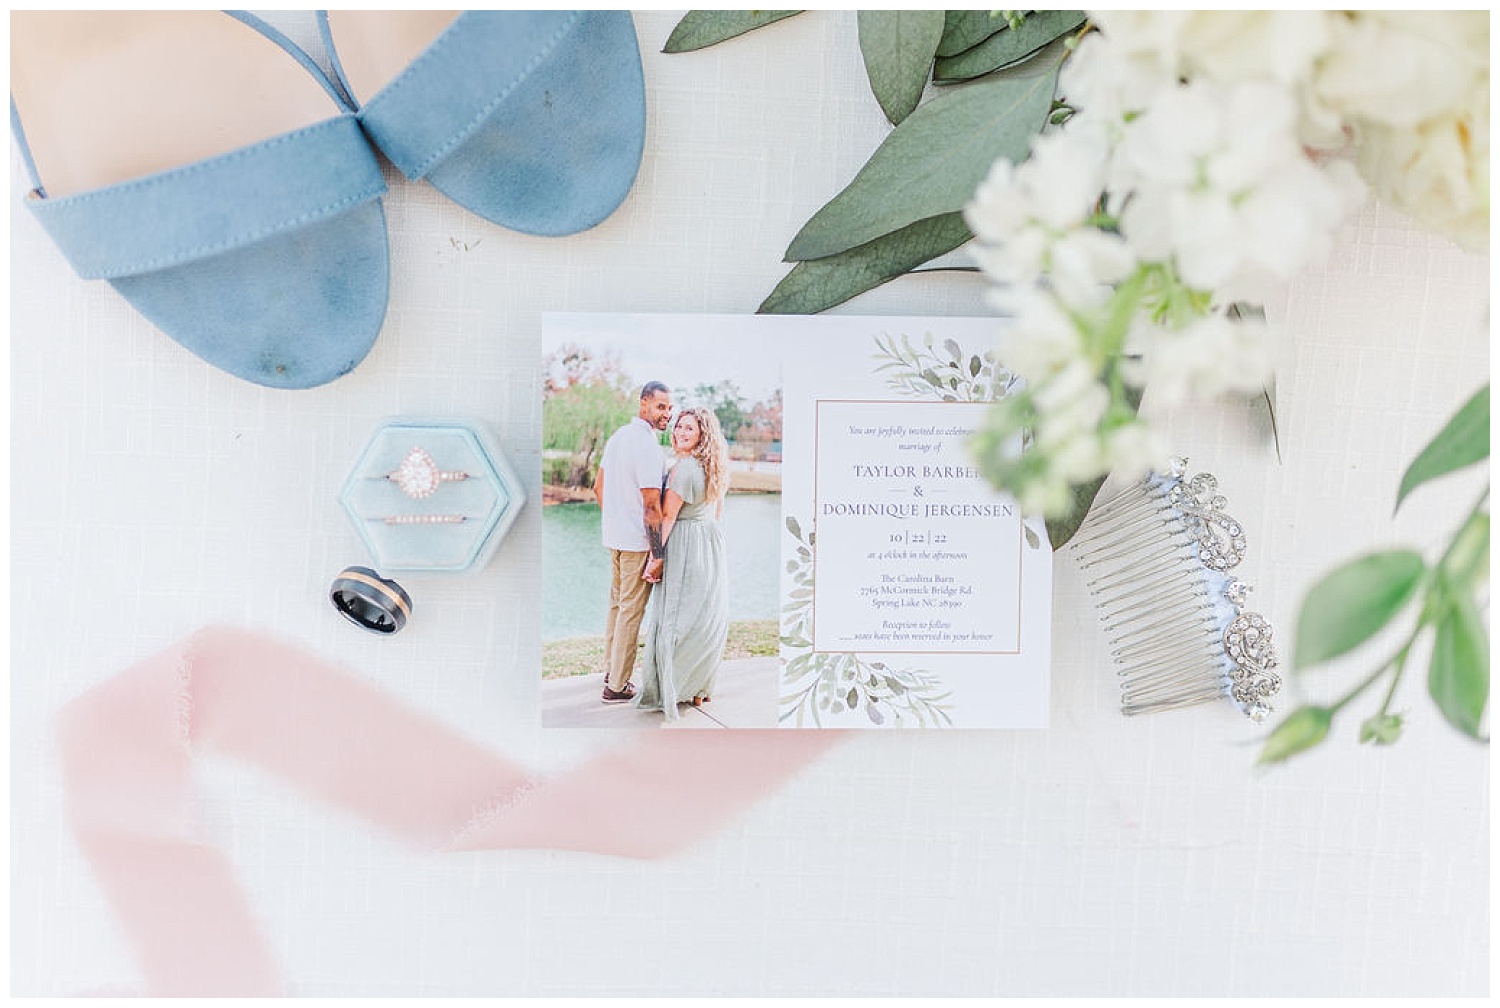 wedding invite sitting on top of pink ribbon next to blue shoes